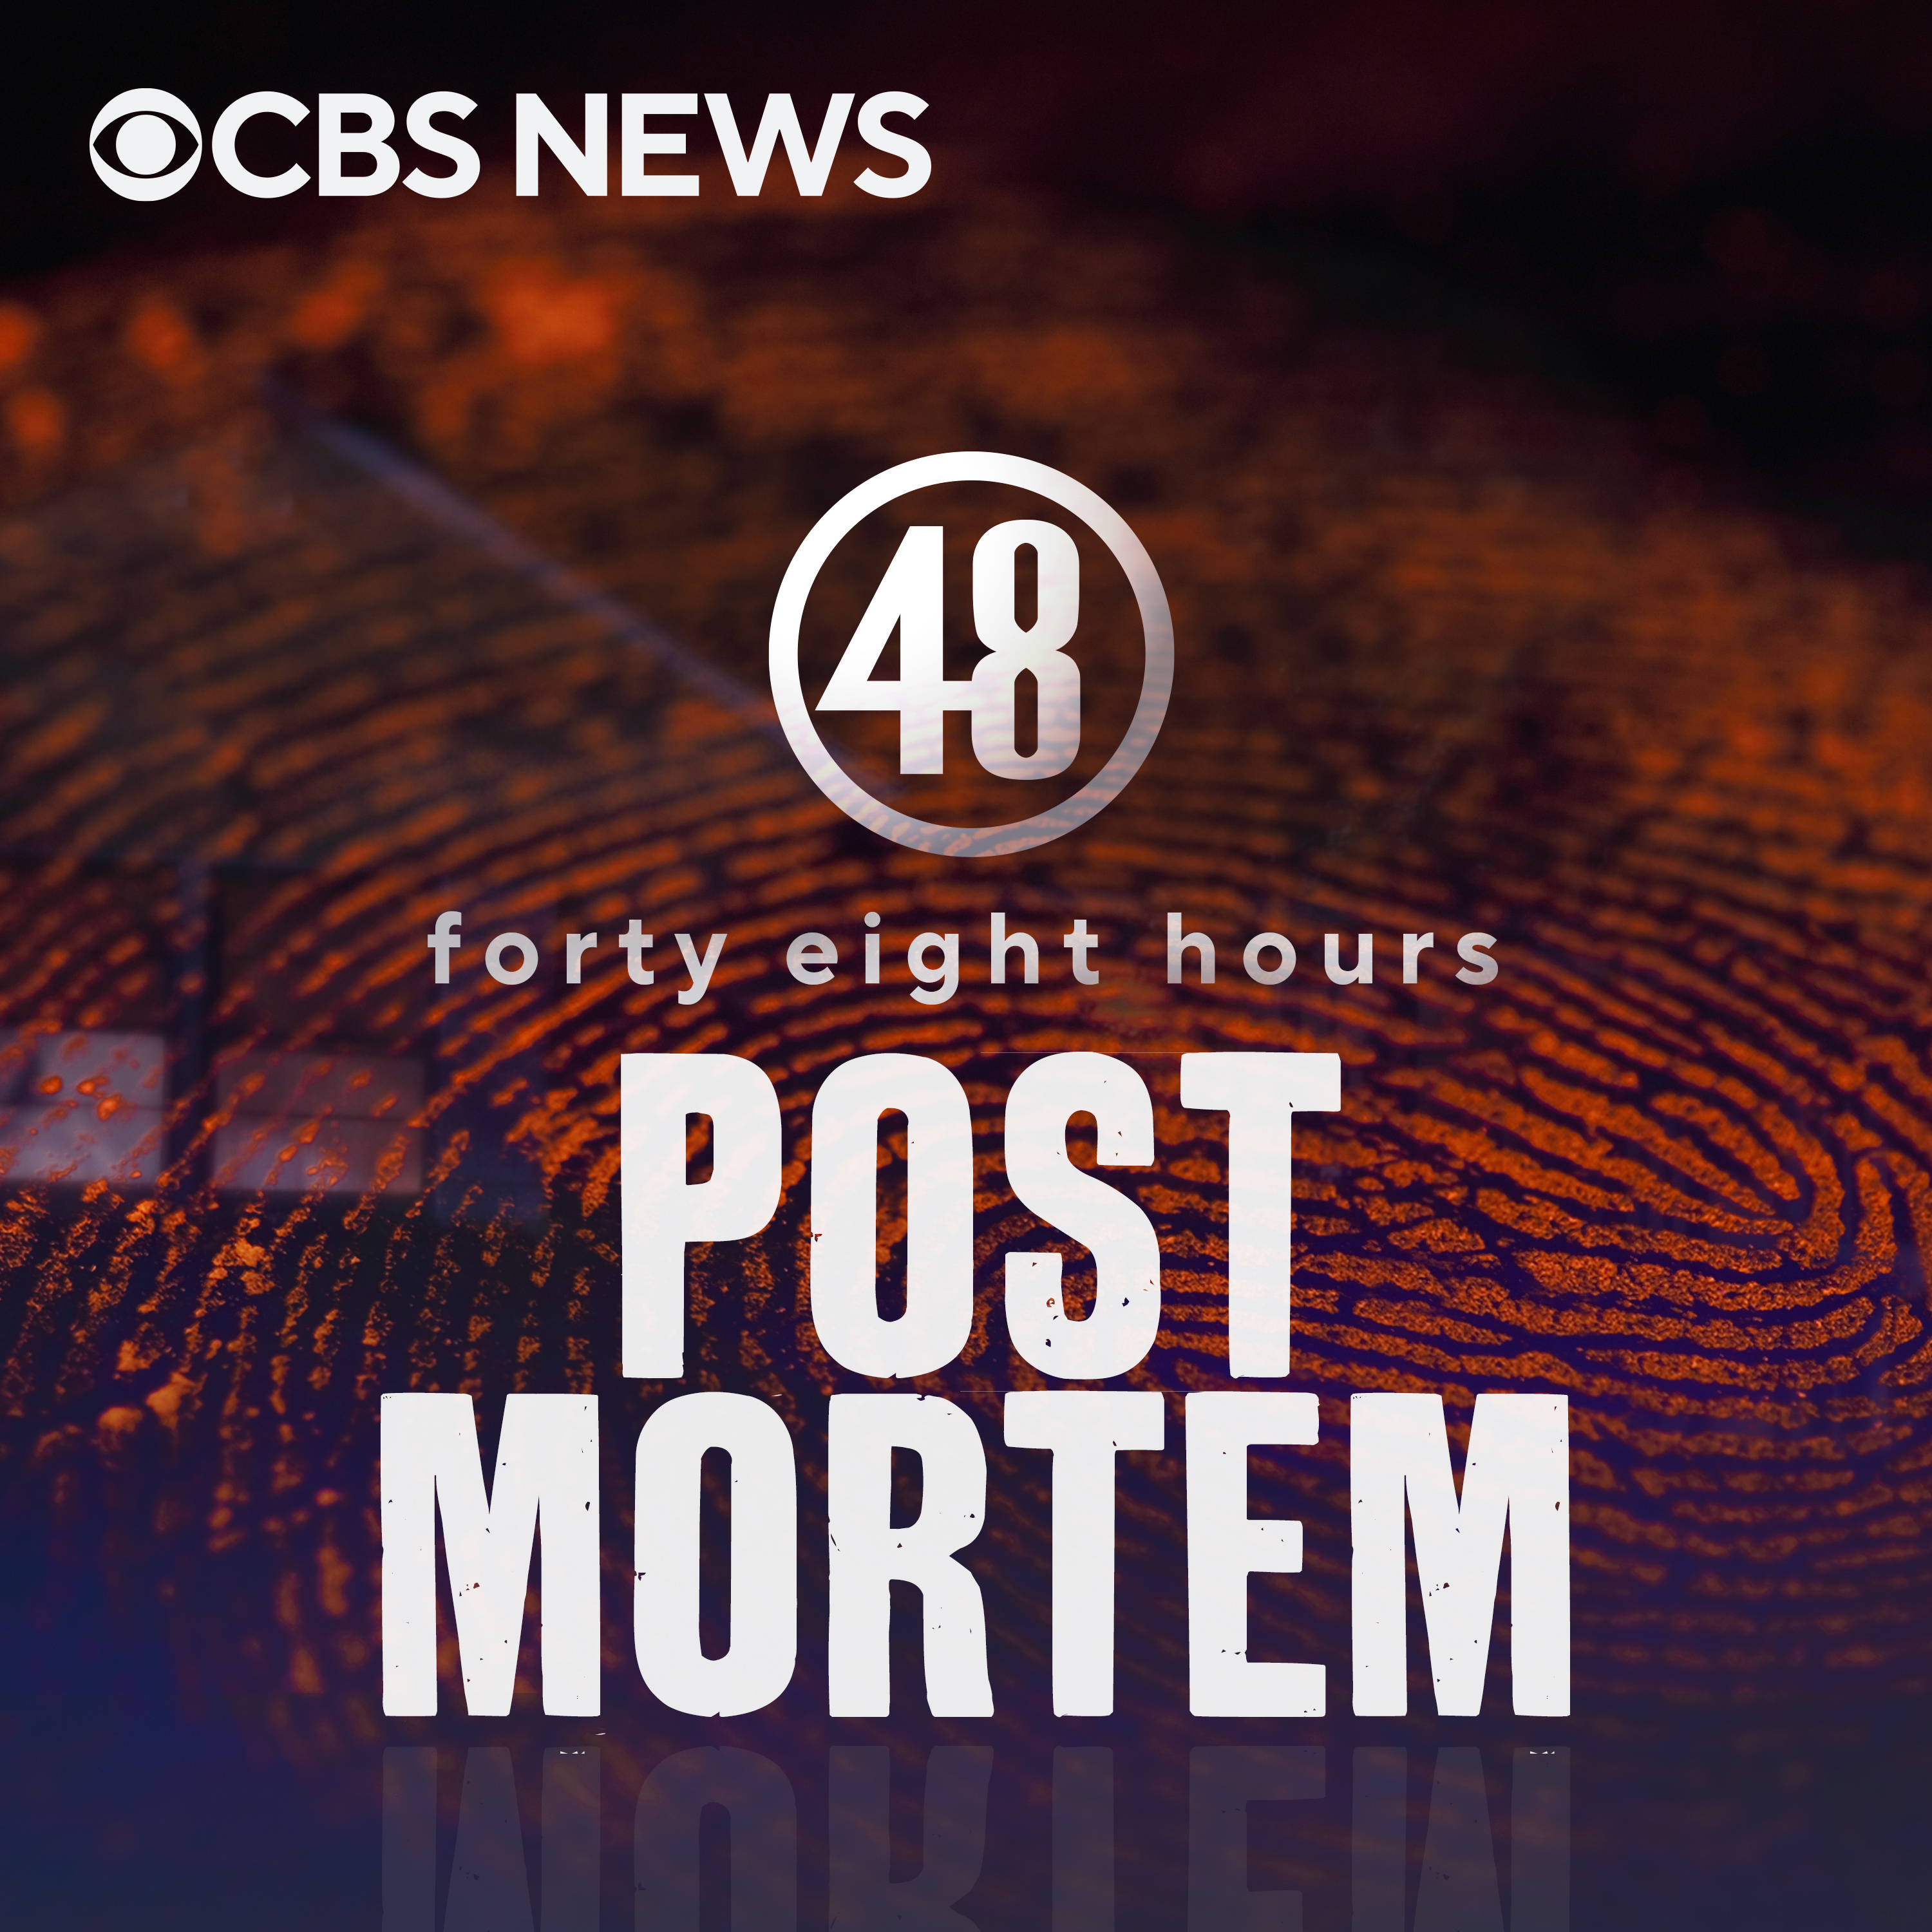 Post Mortem | Who Poisoned Angela Craig? by CBS News